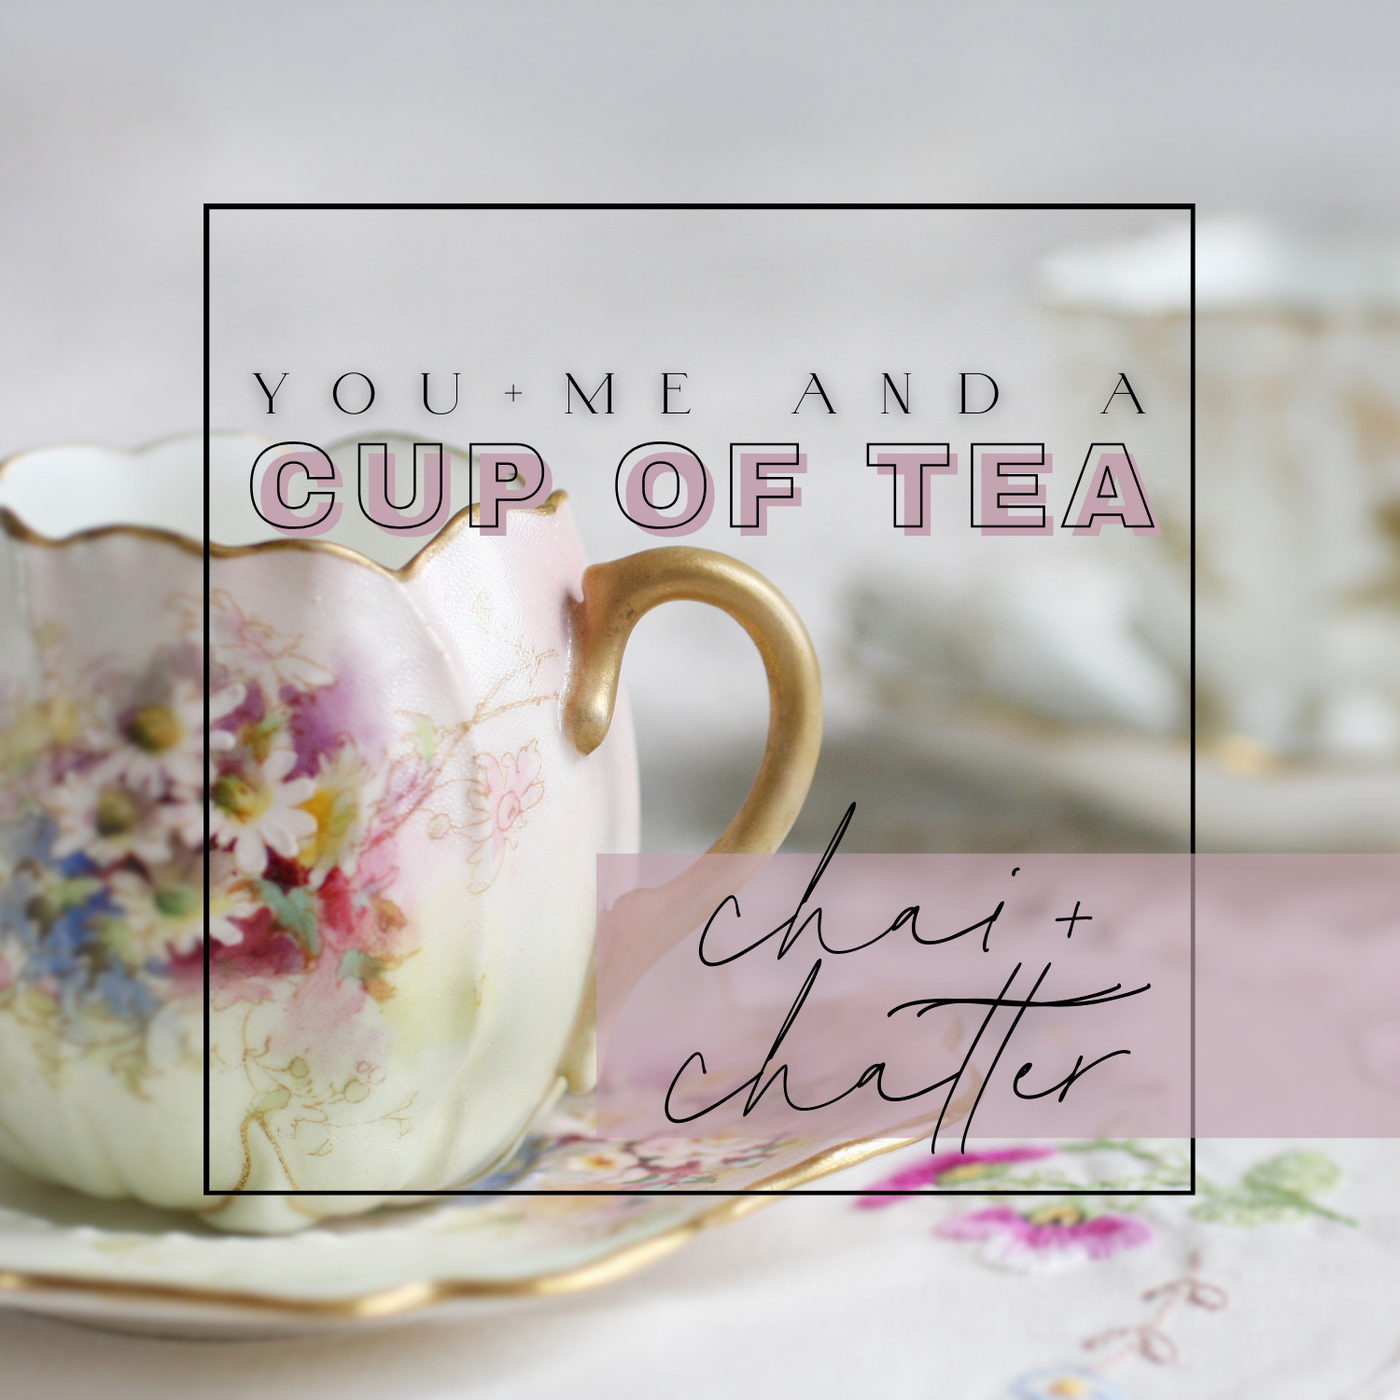 You, Me, and a Cup of Tea - Chai & Chatter